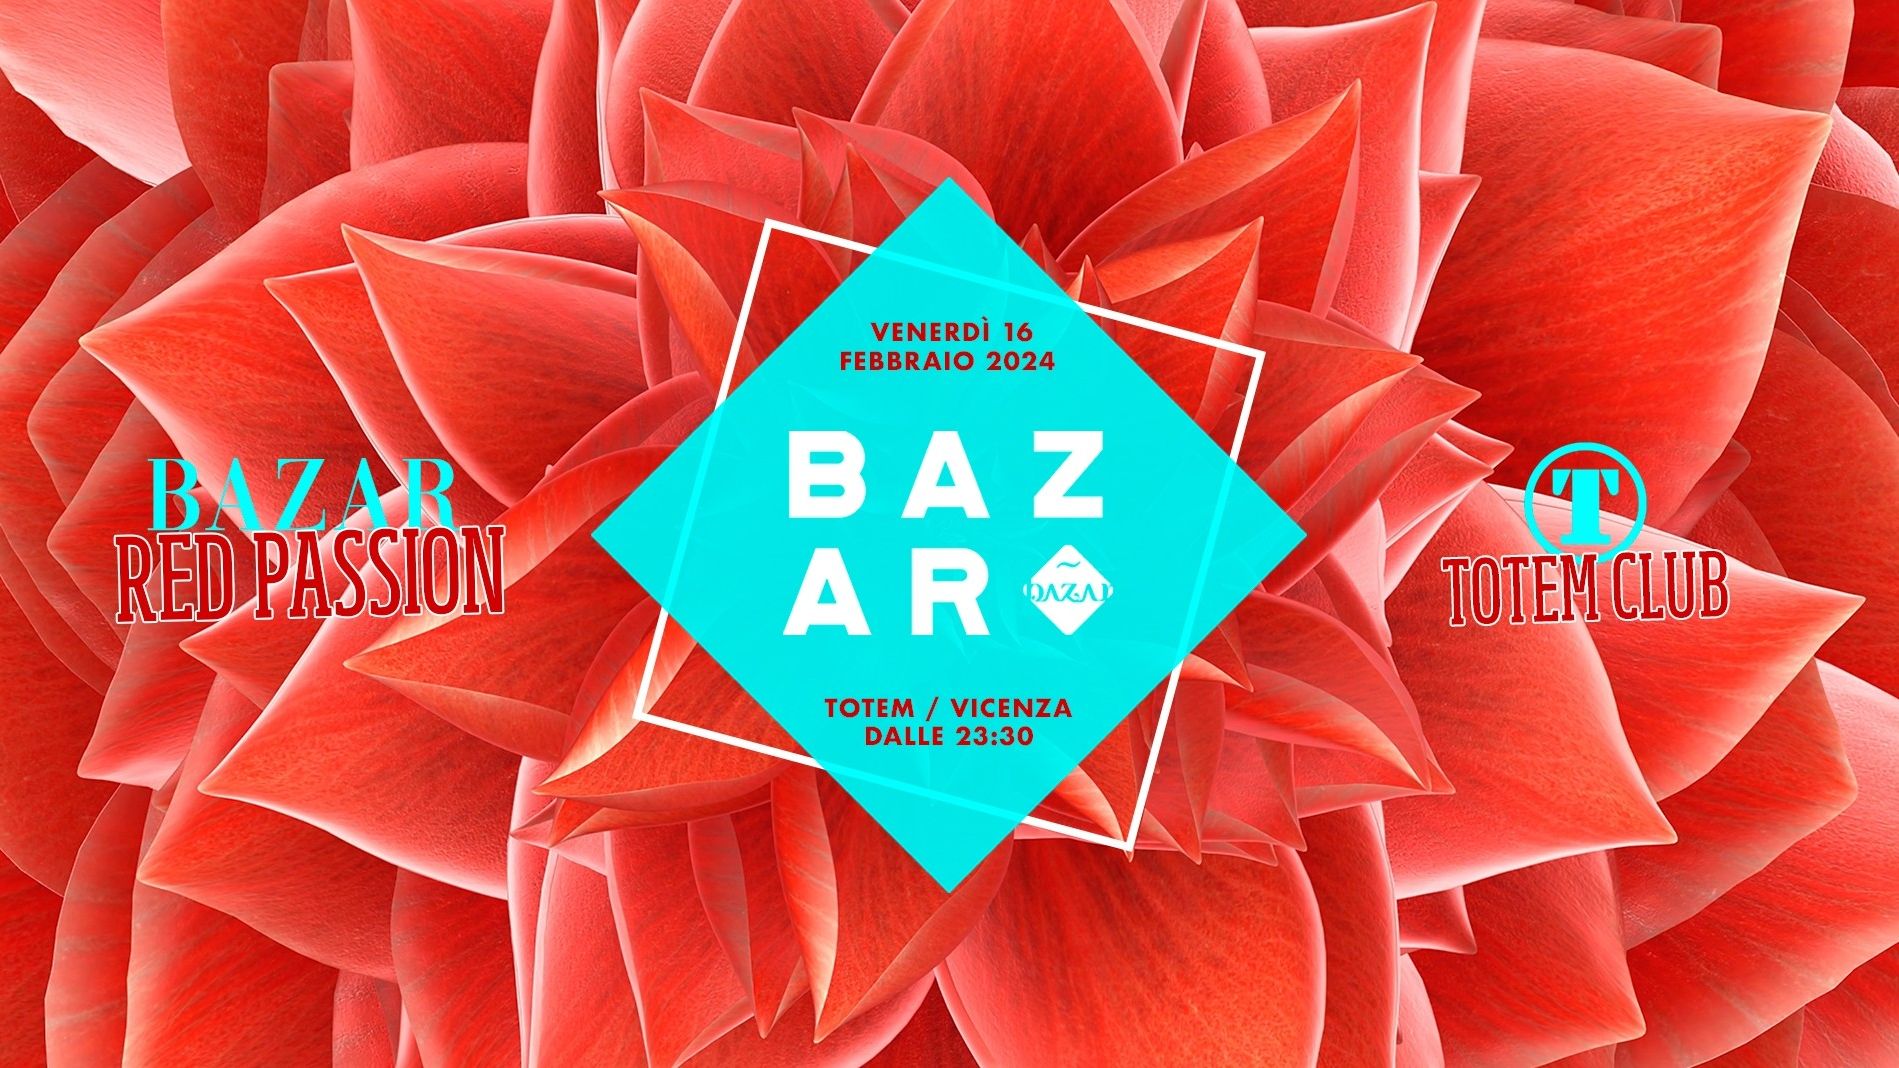 Bazar - Red Passion